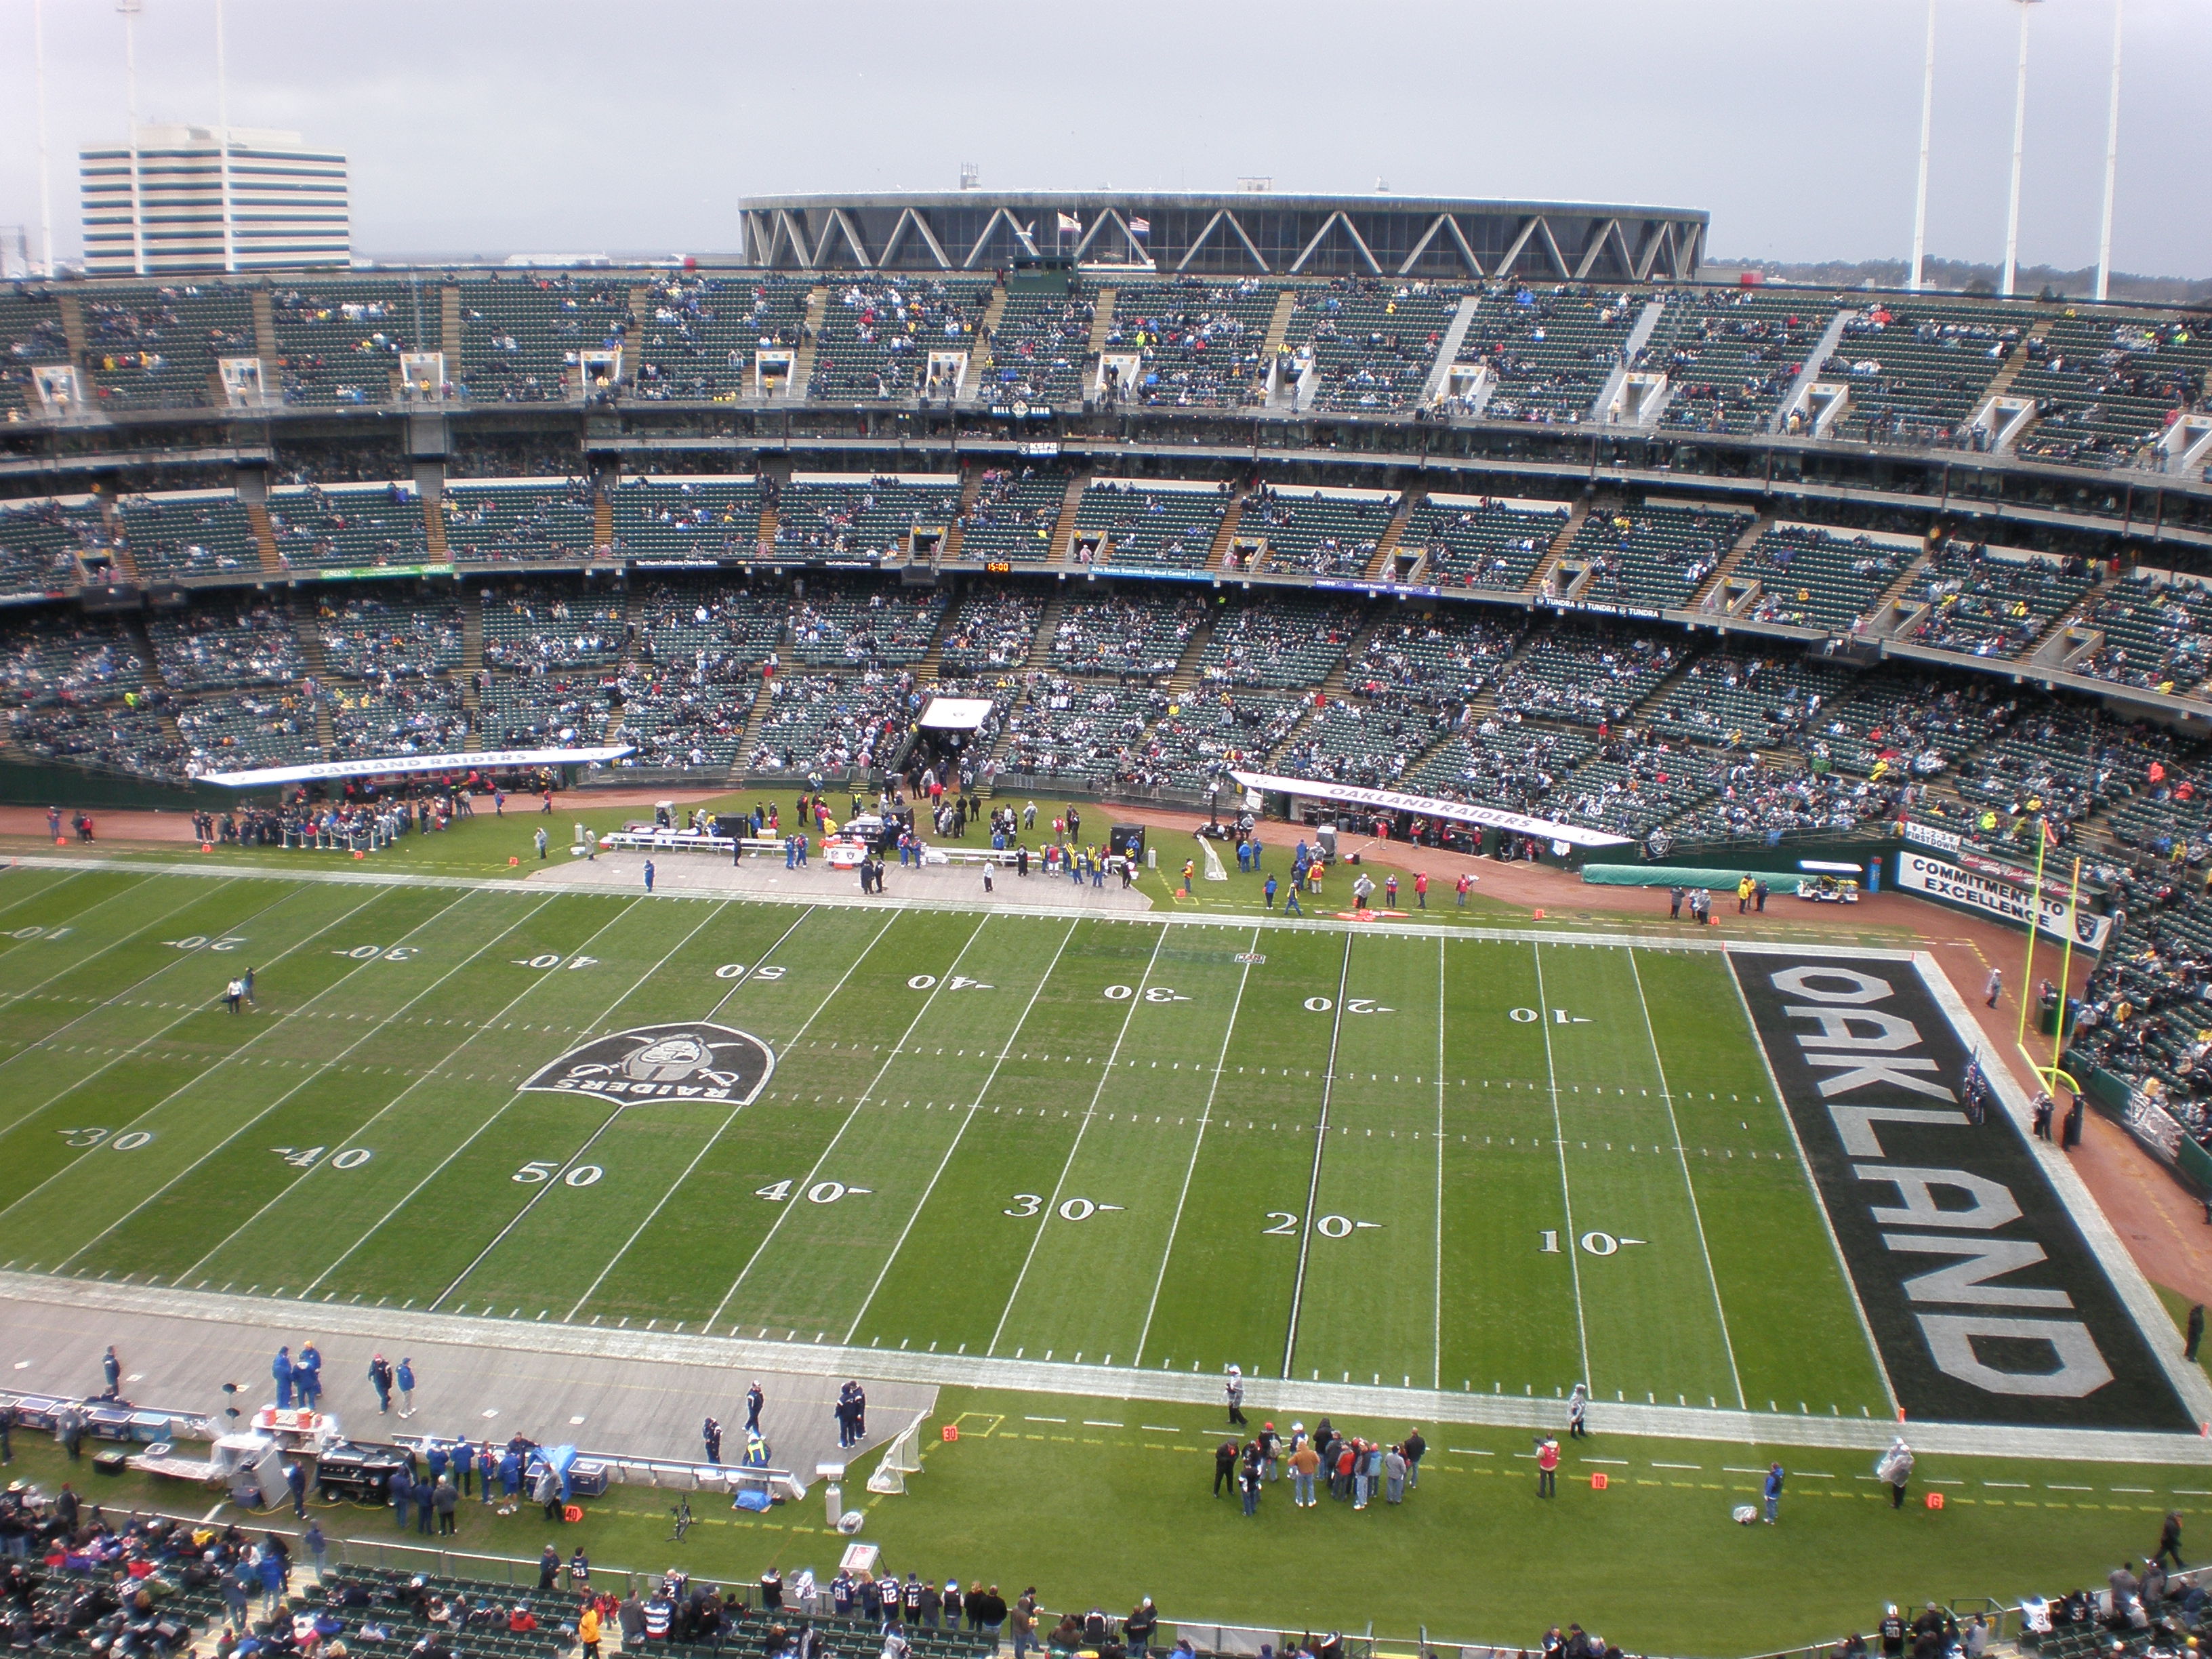 RingCentral Coliseum, home of the Oakland Raiders